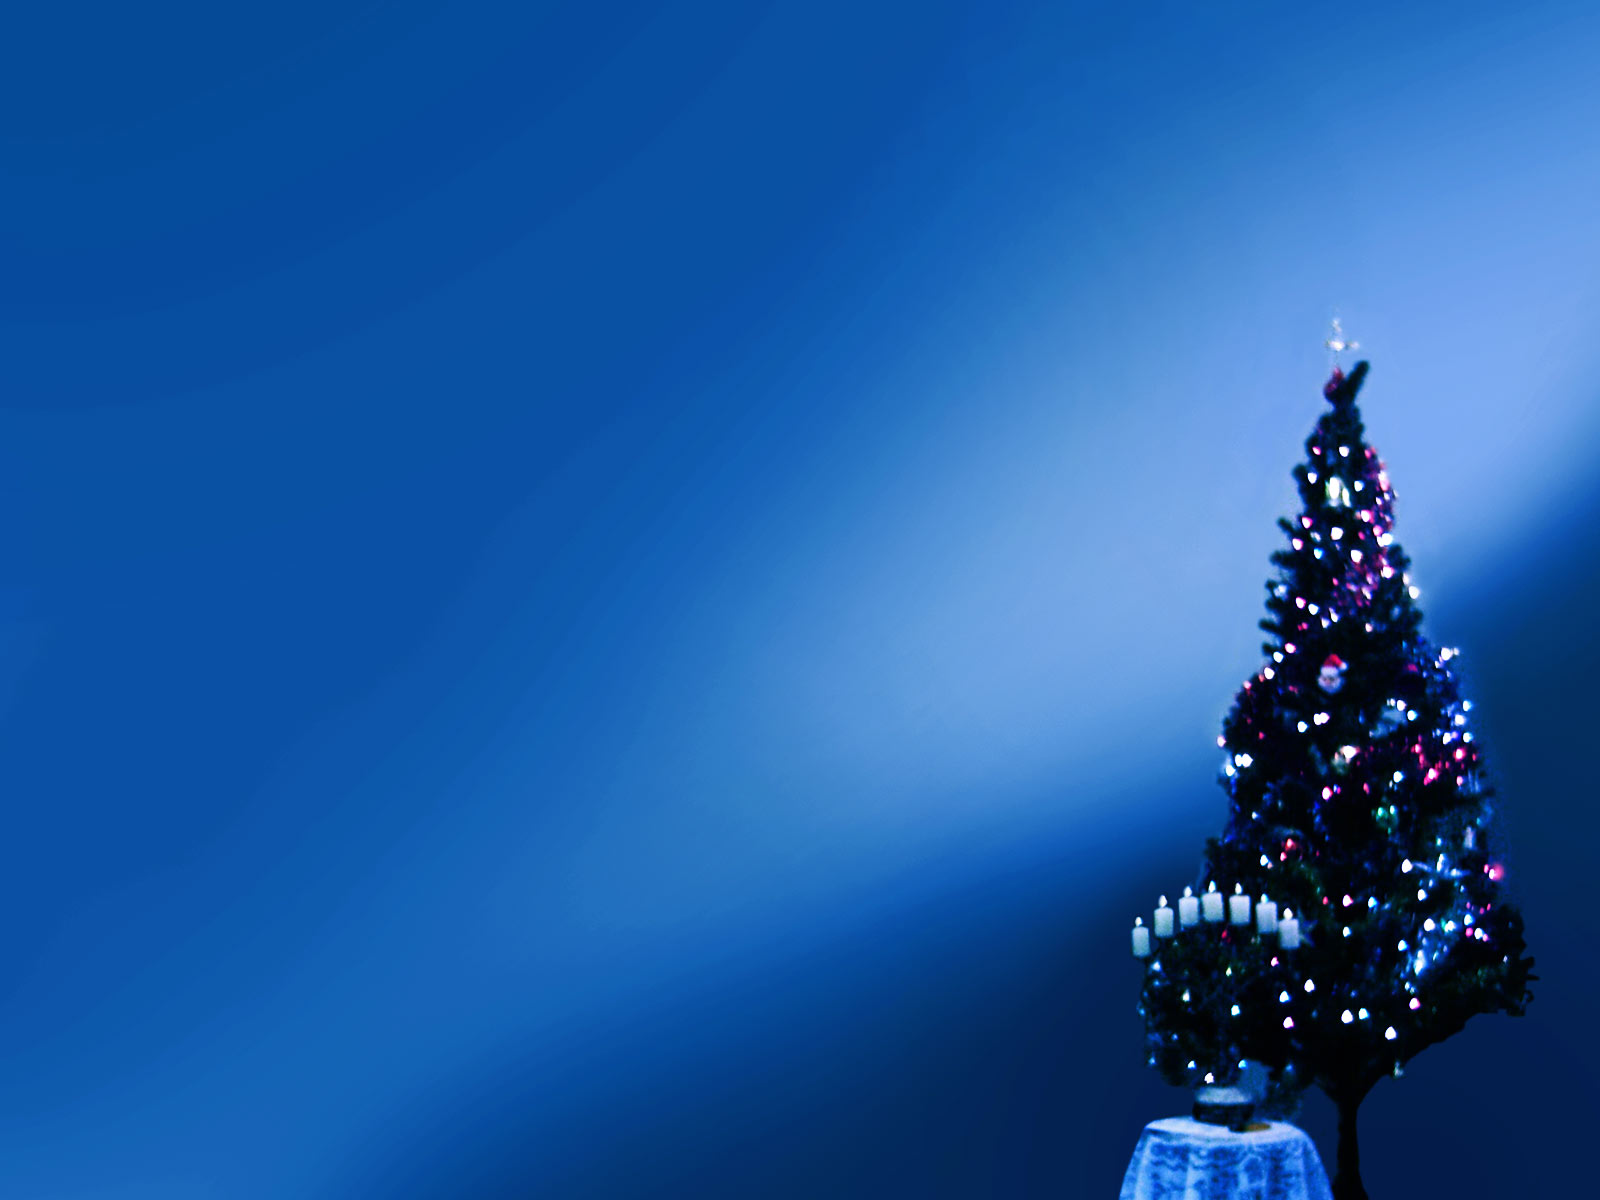 Night Christmas Theme For Powerpoint Background